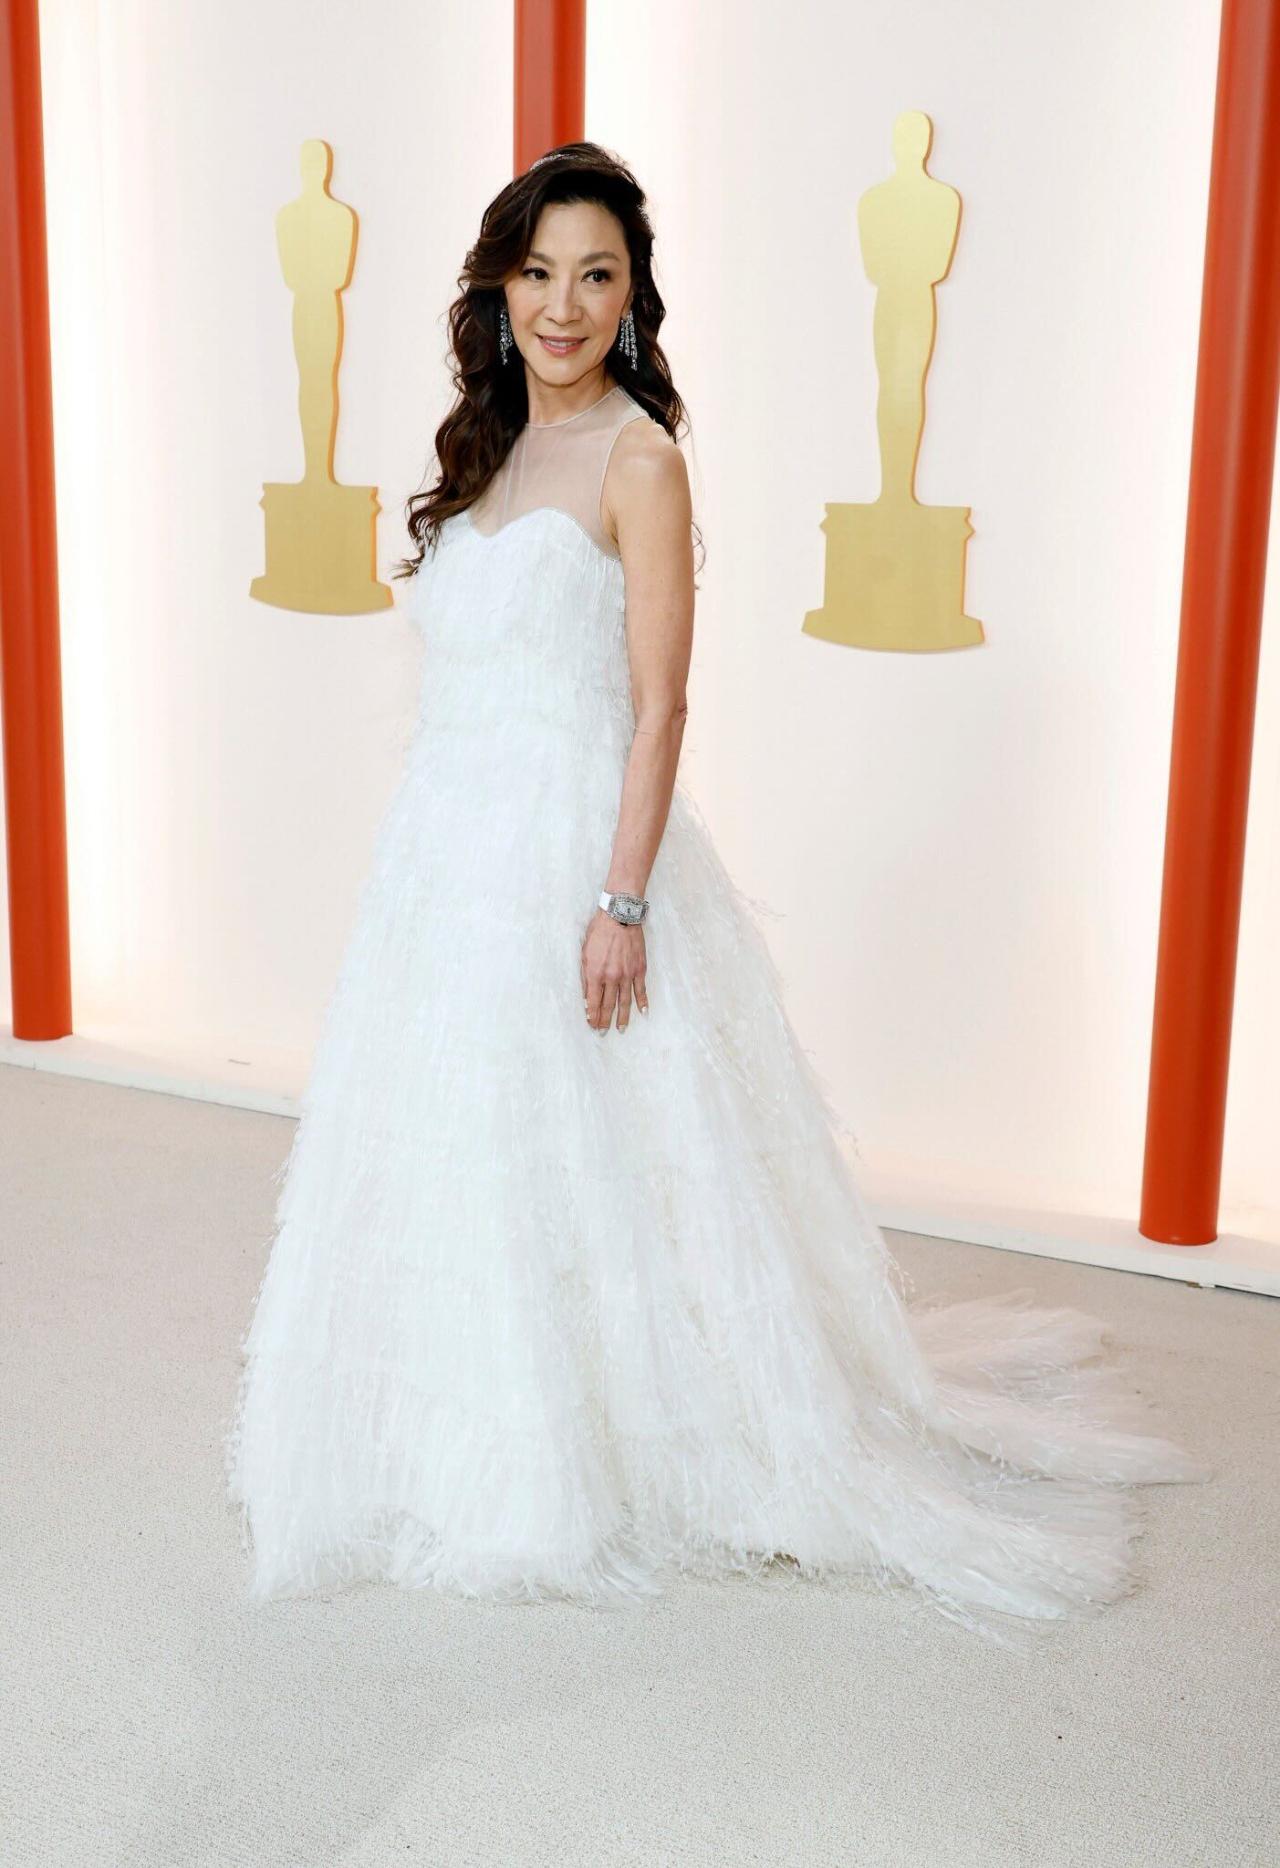 Michelle stunned everyone in a textured white Dior gown. She has been nominated in the Best Actress category